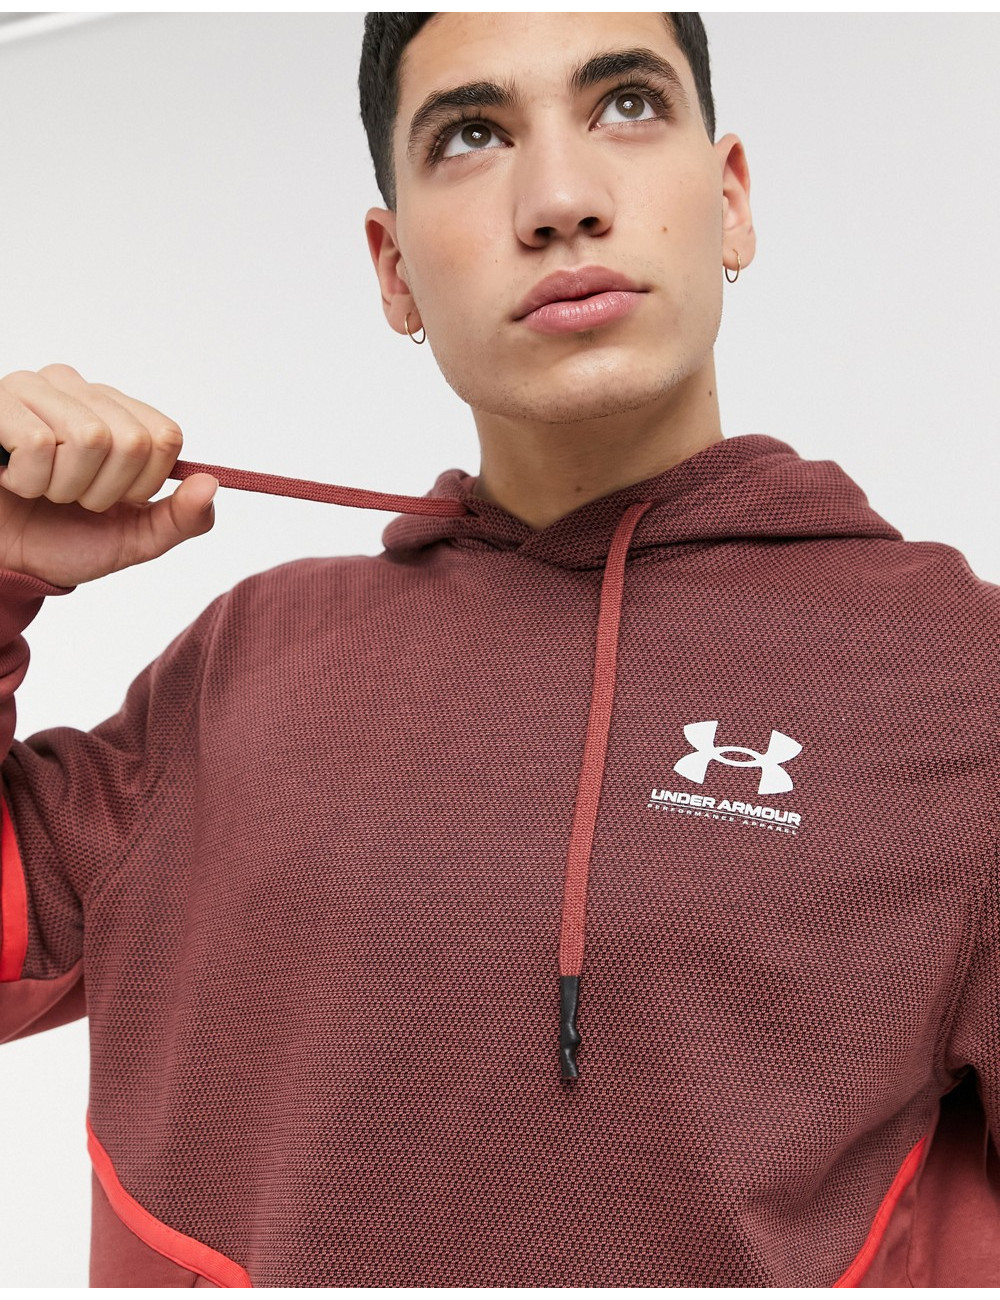 Under Armour hoodie in red